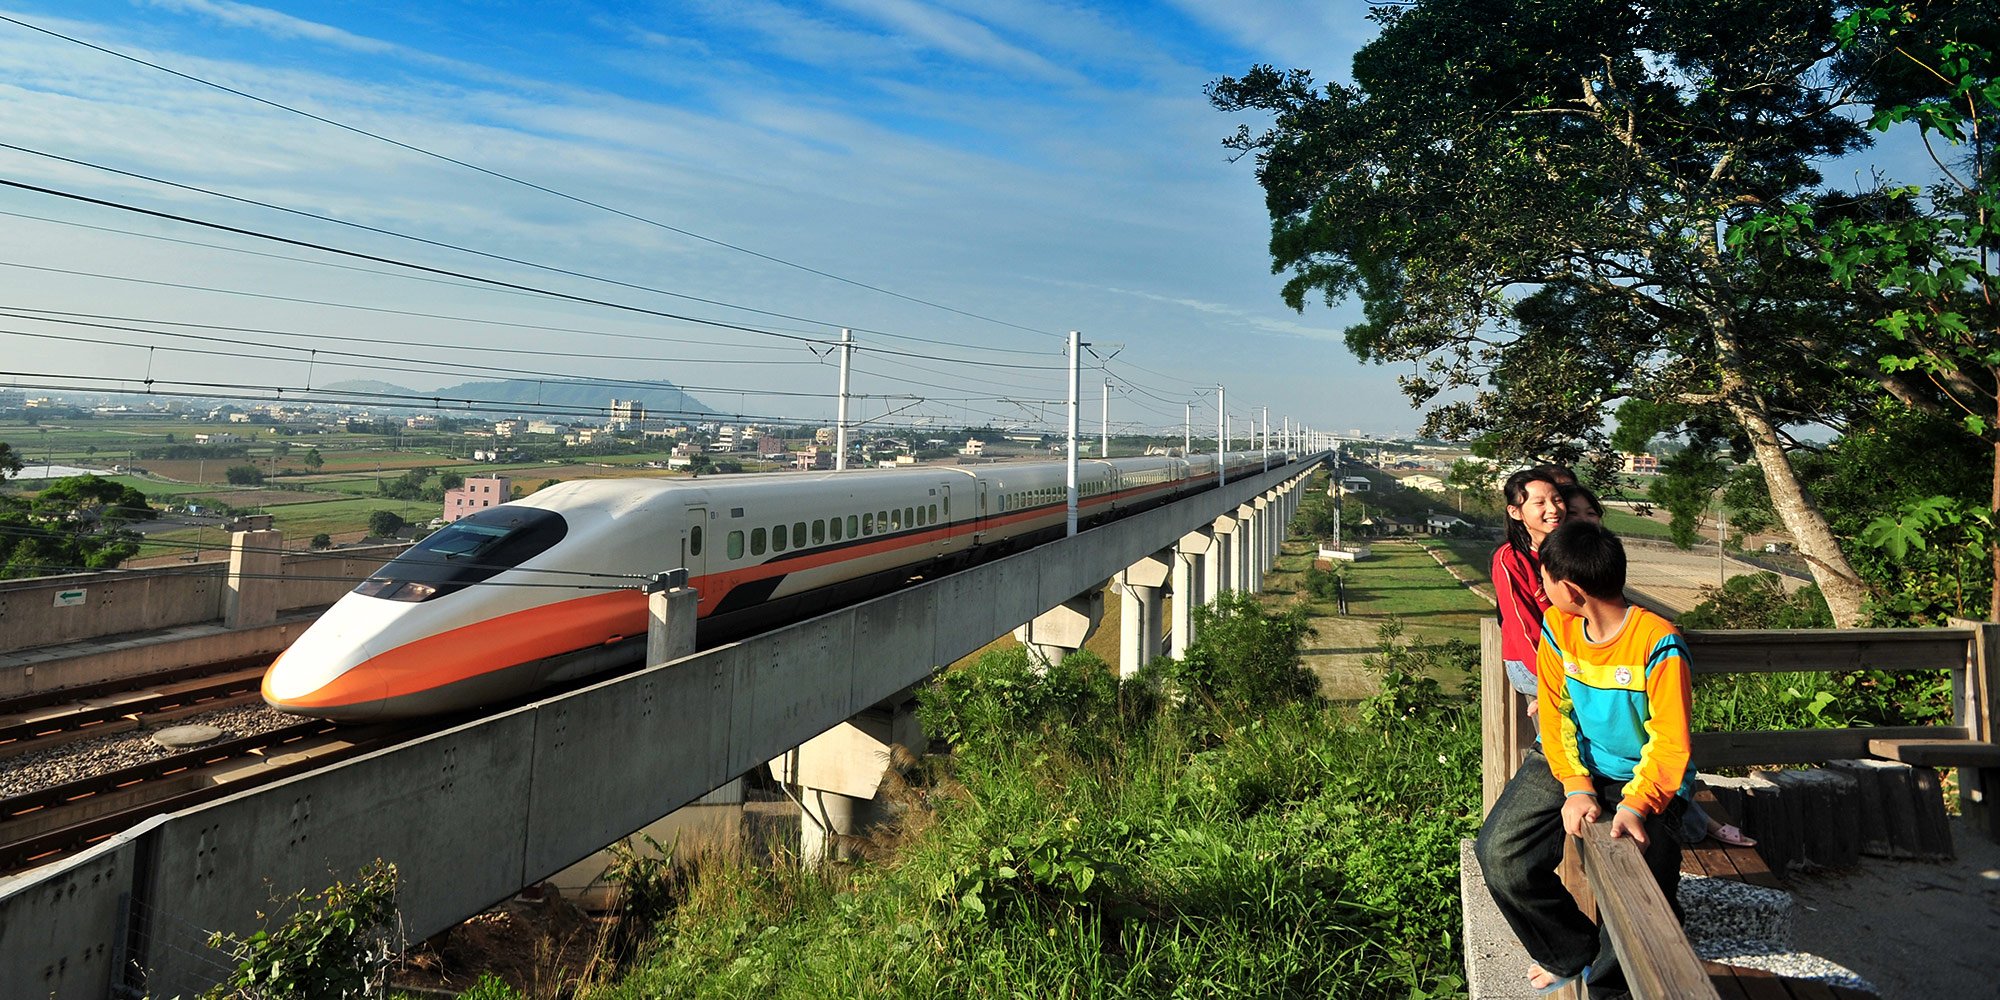 Up to 20% discount on high-speed rail purchase